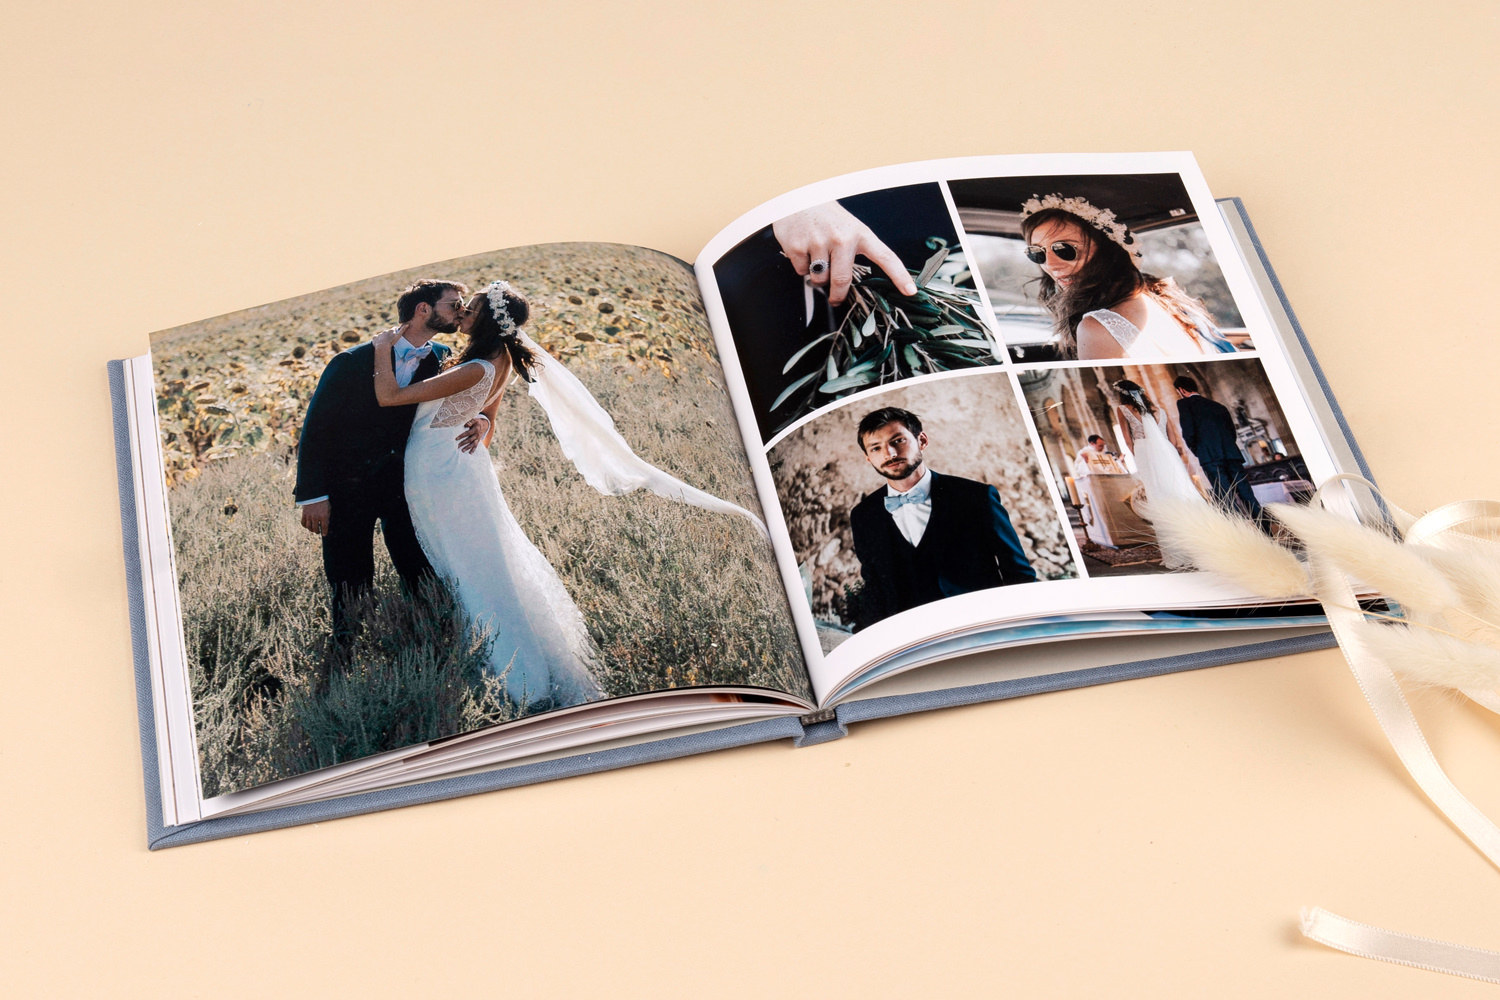 14 Creative Things You Can Do With Your Wedding Photos - 2022 Guide - Weddi...